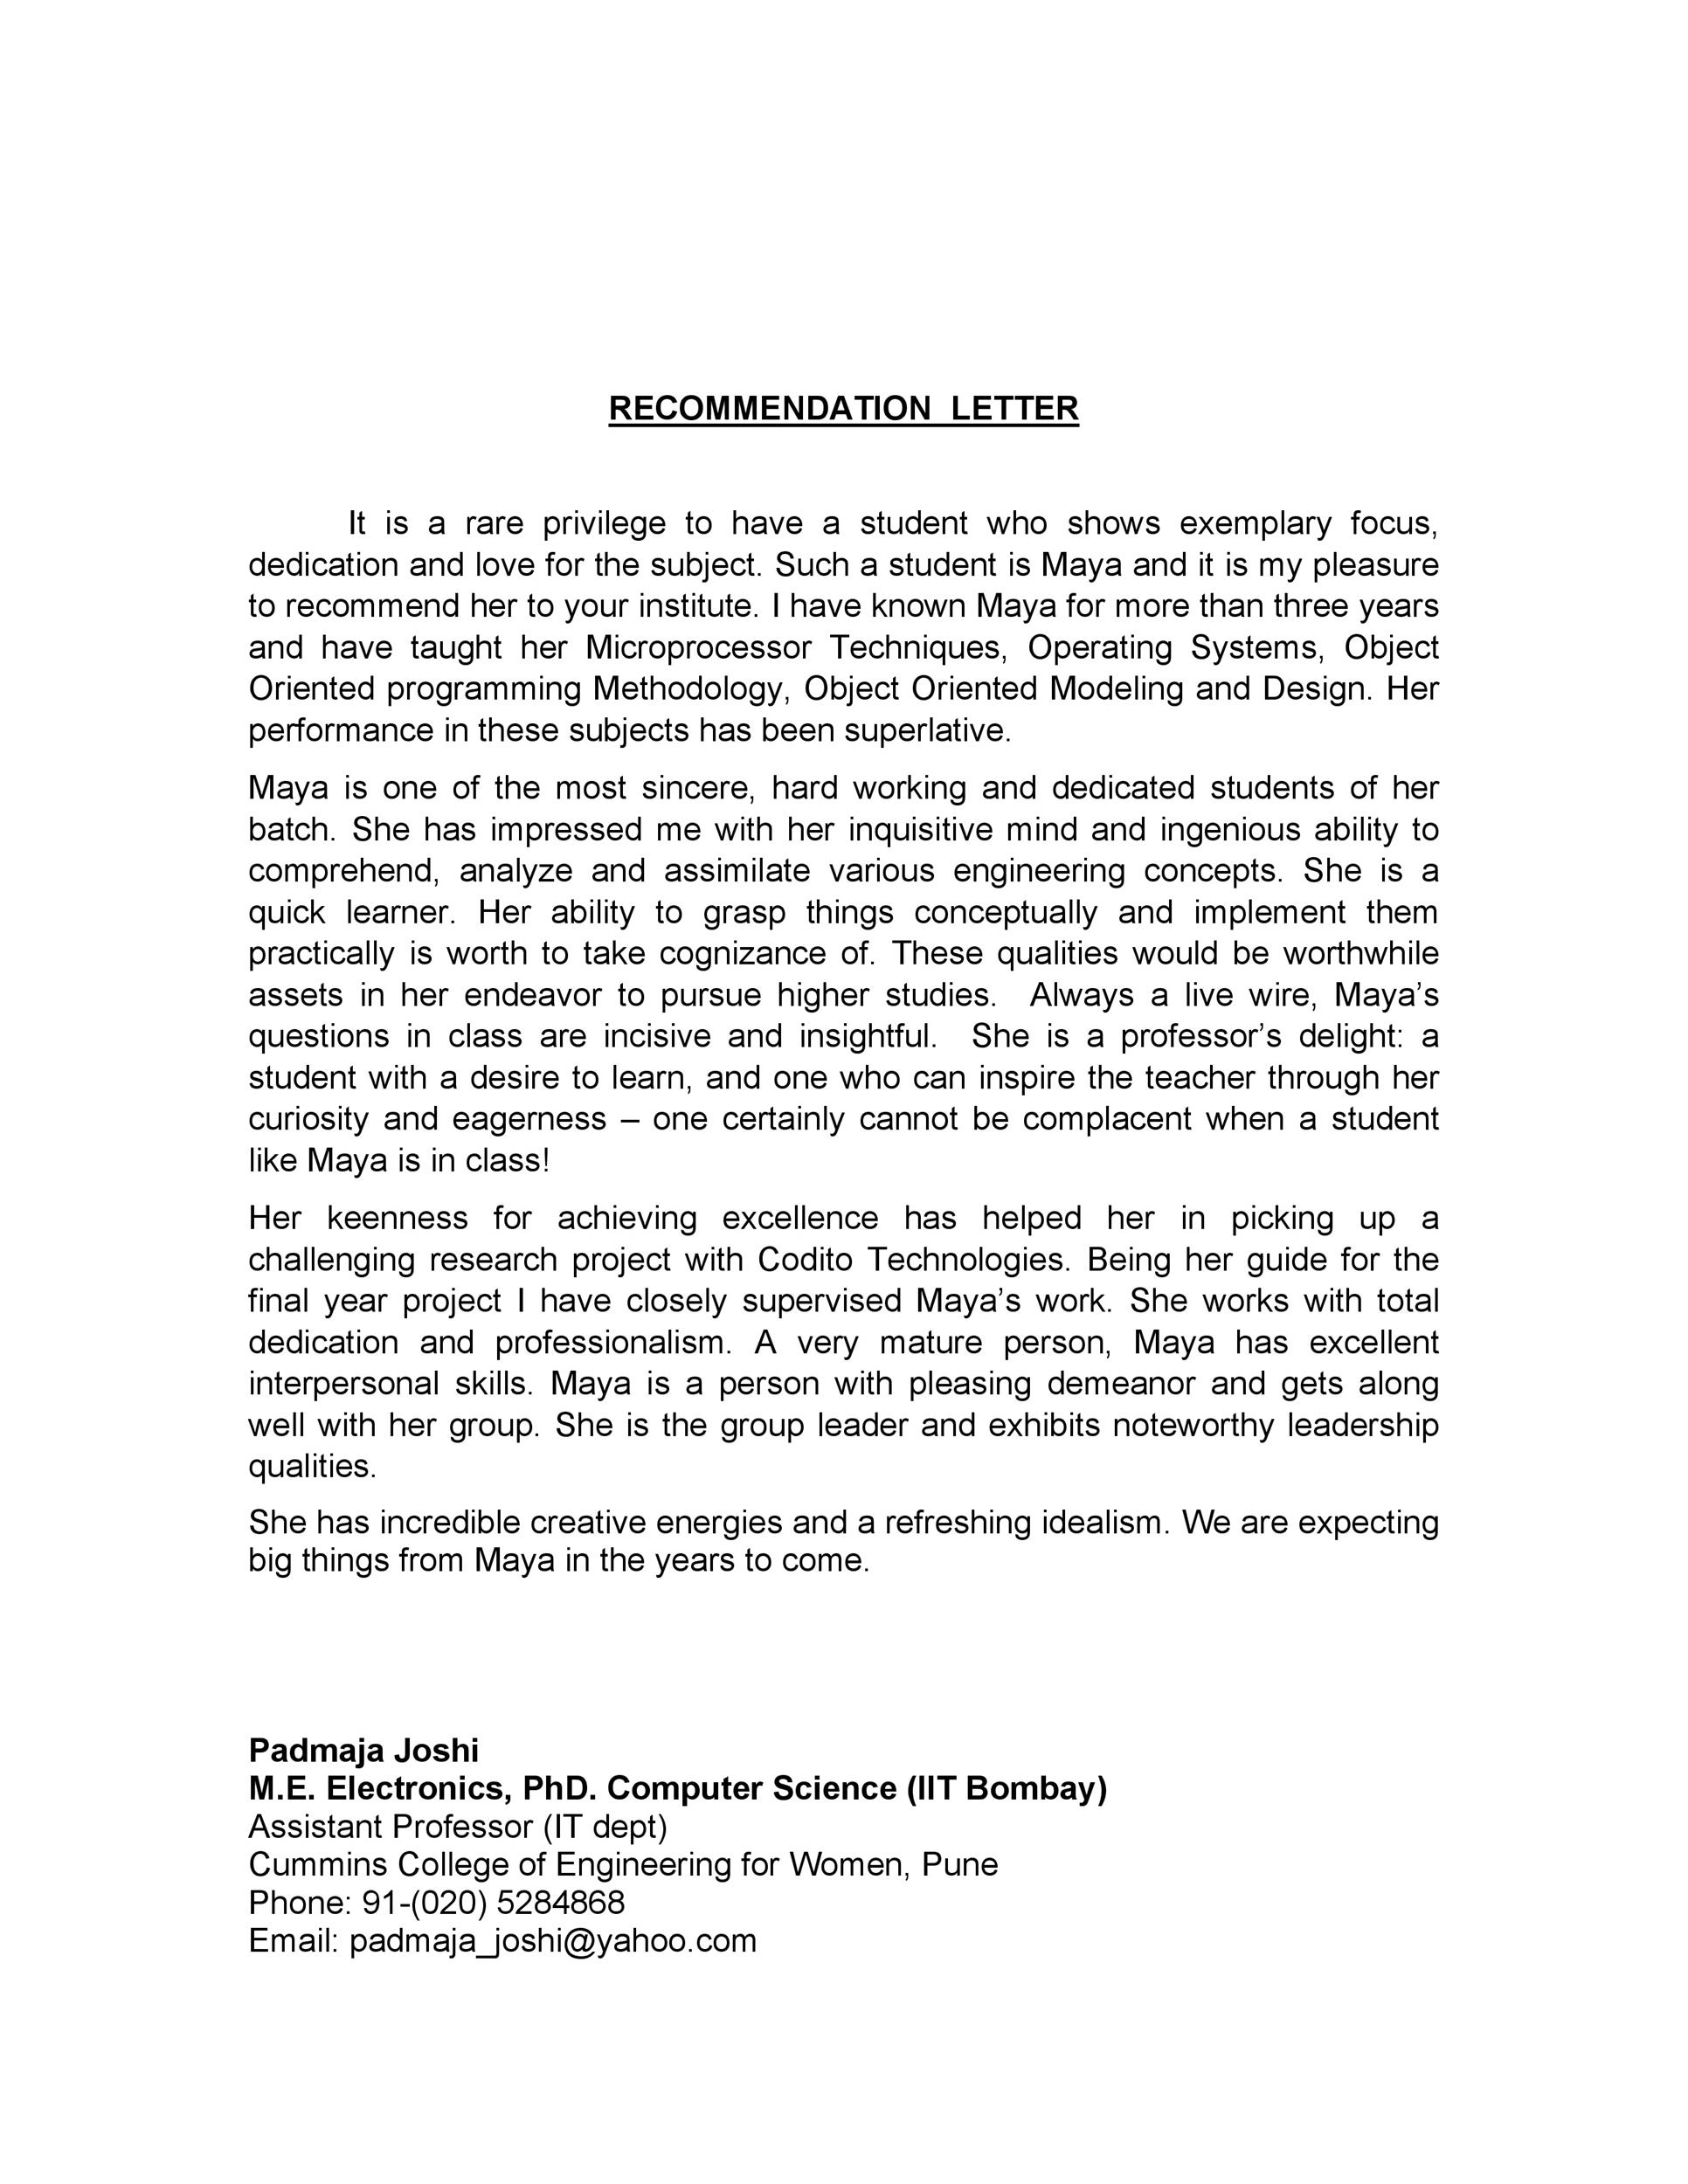 Recommendation Letter For Student From Teacher from templatelab.com